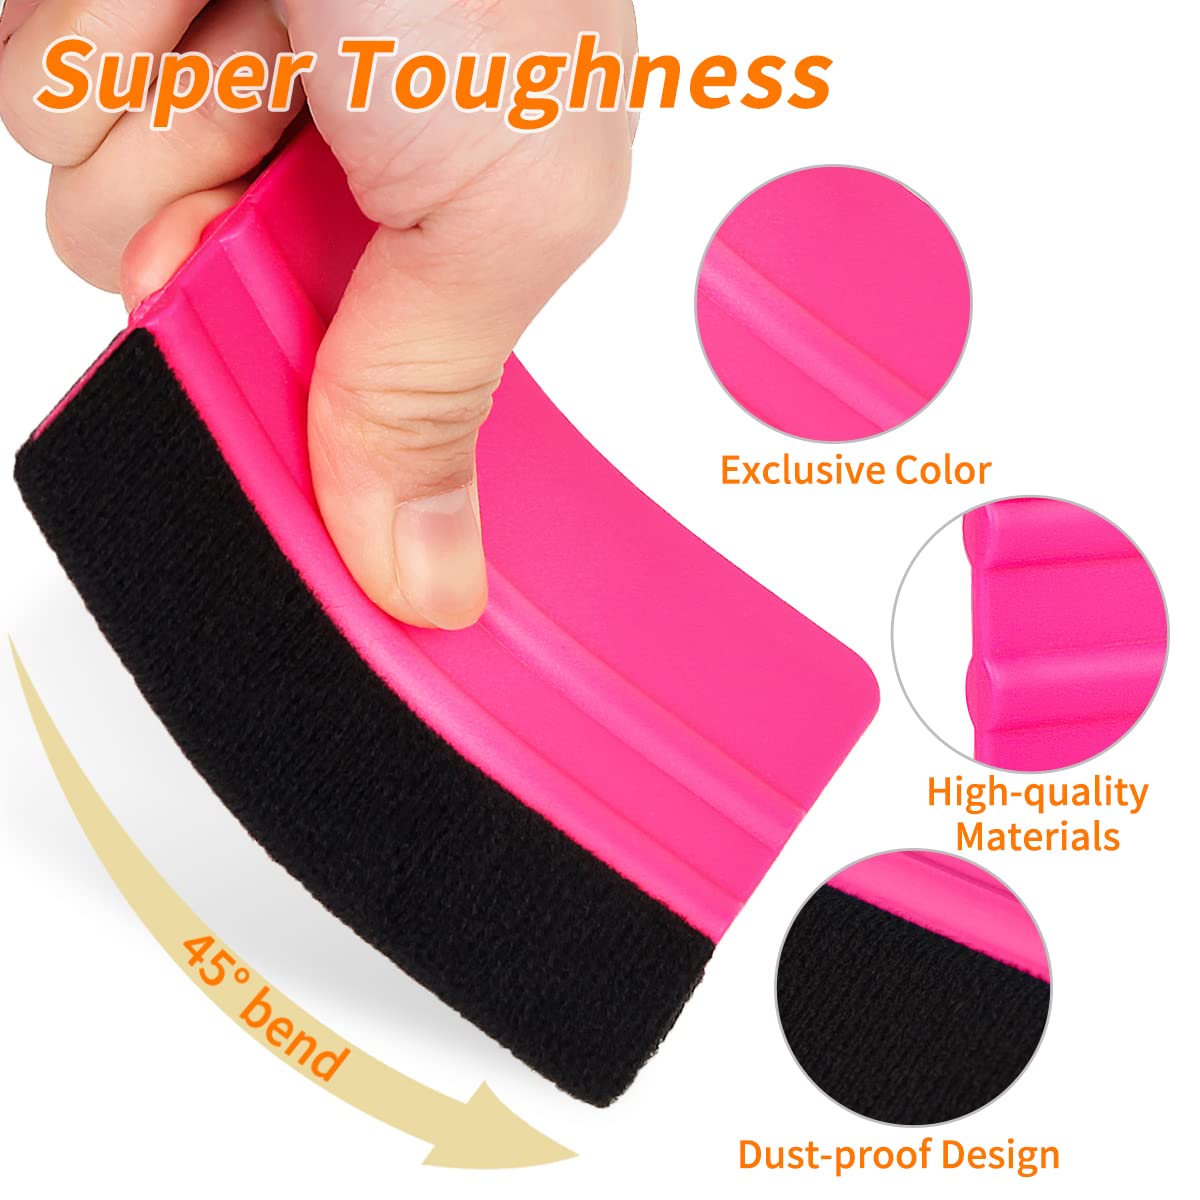 Squeegee for Vinyl - 2Pack Felt Squeegee Tool, Craft Adhesive Vinyl for Car Film Wrap, Sign Making, DIY Crafting, Window